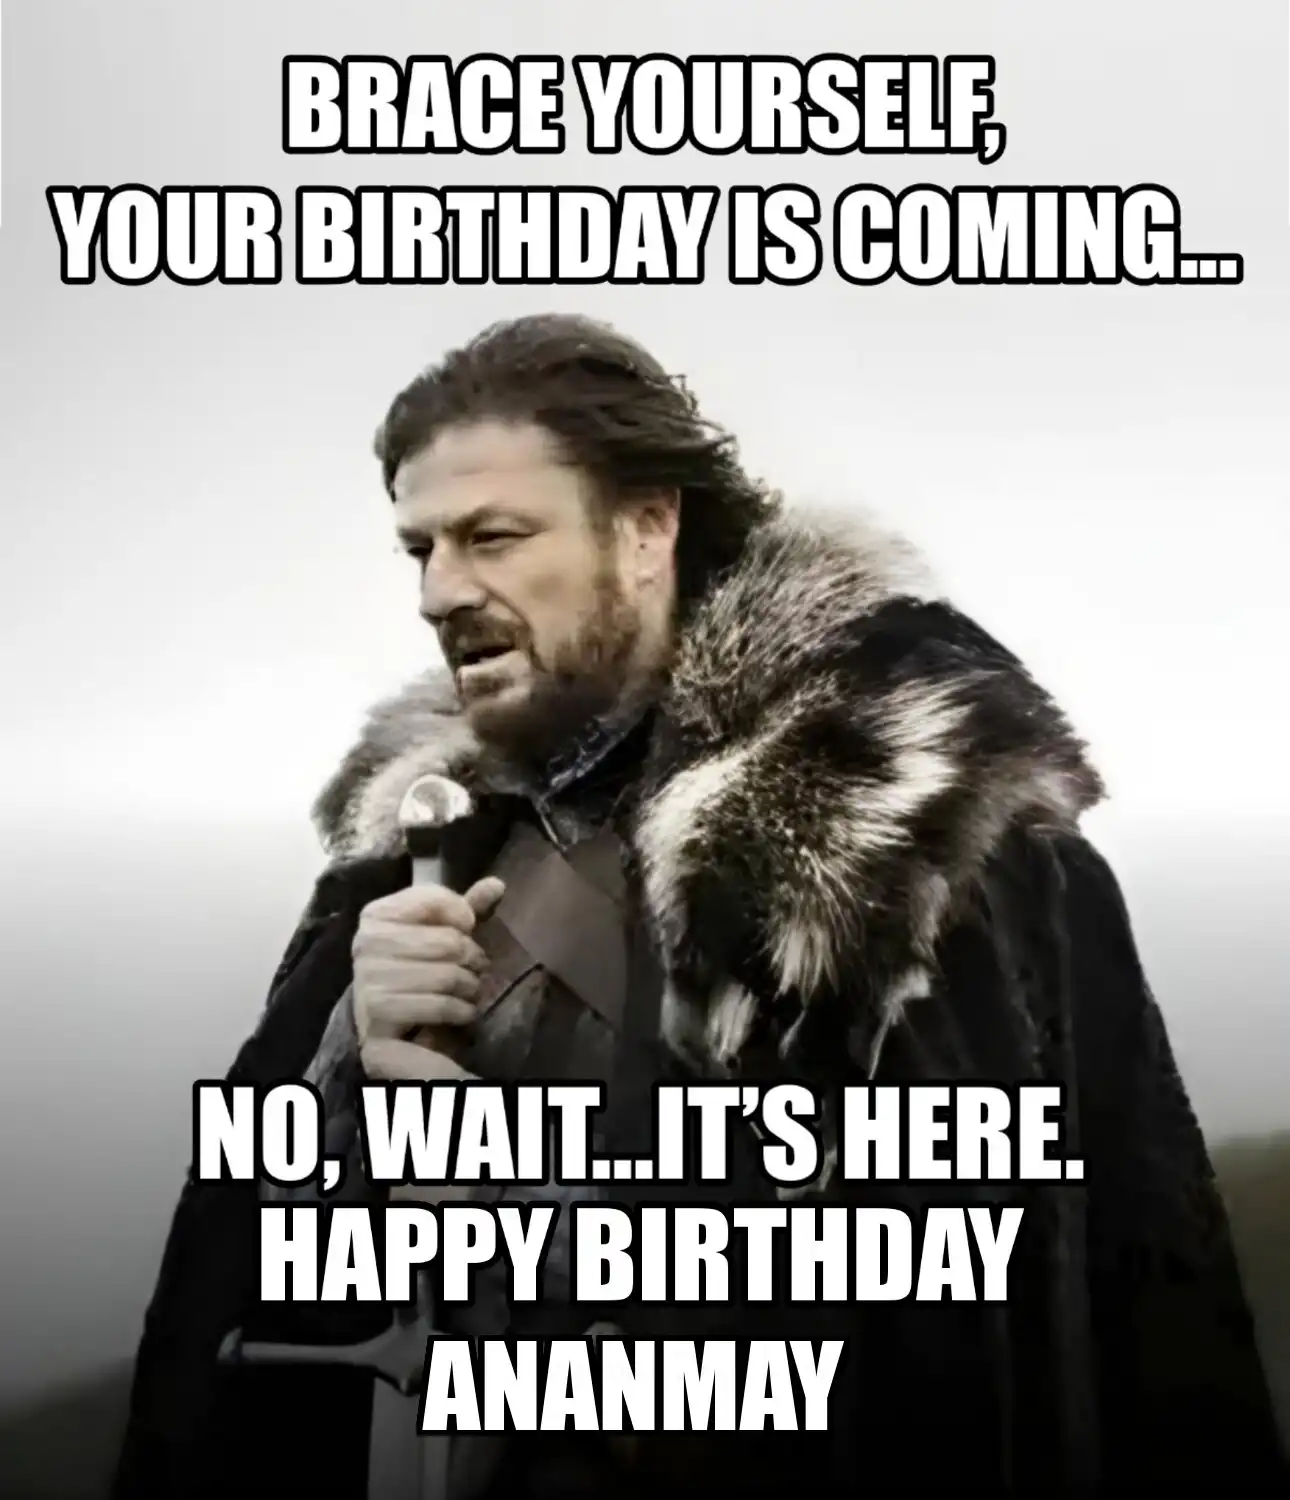 Happy Birthday Ananmay Brace Yourself Your Birthday Is Coming Meme